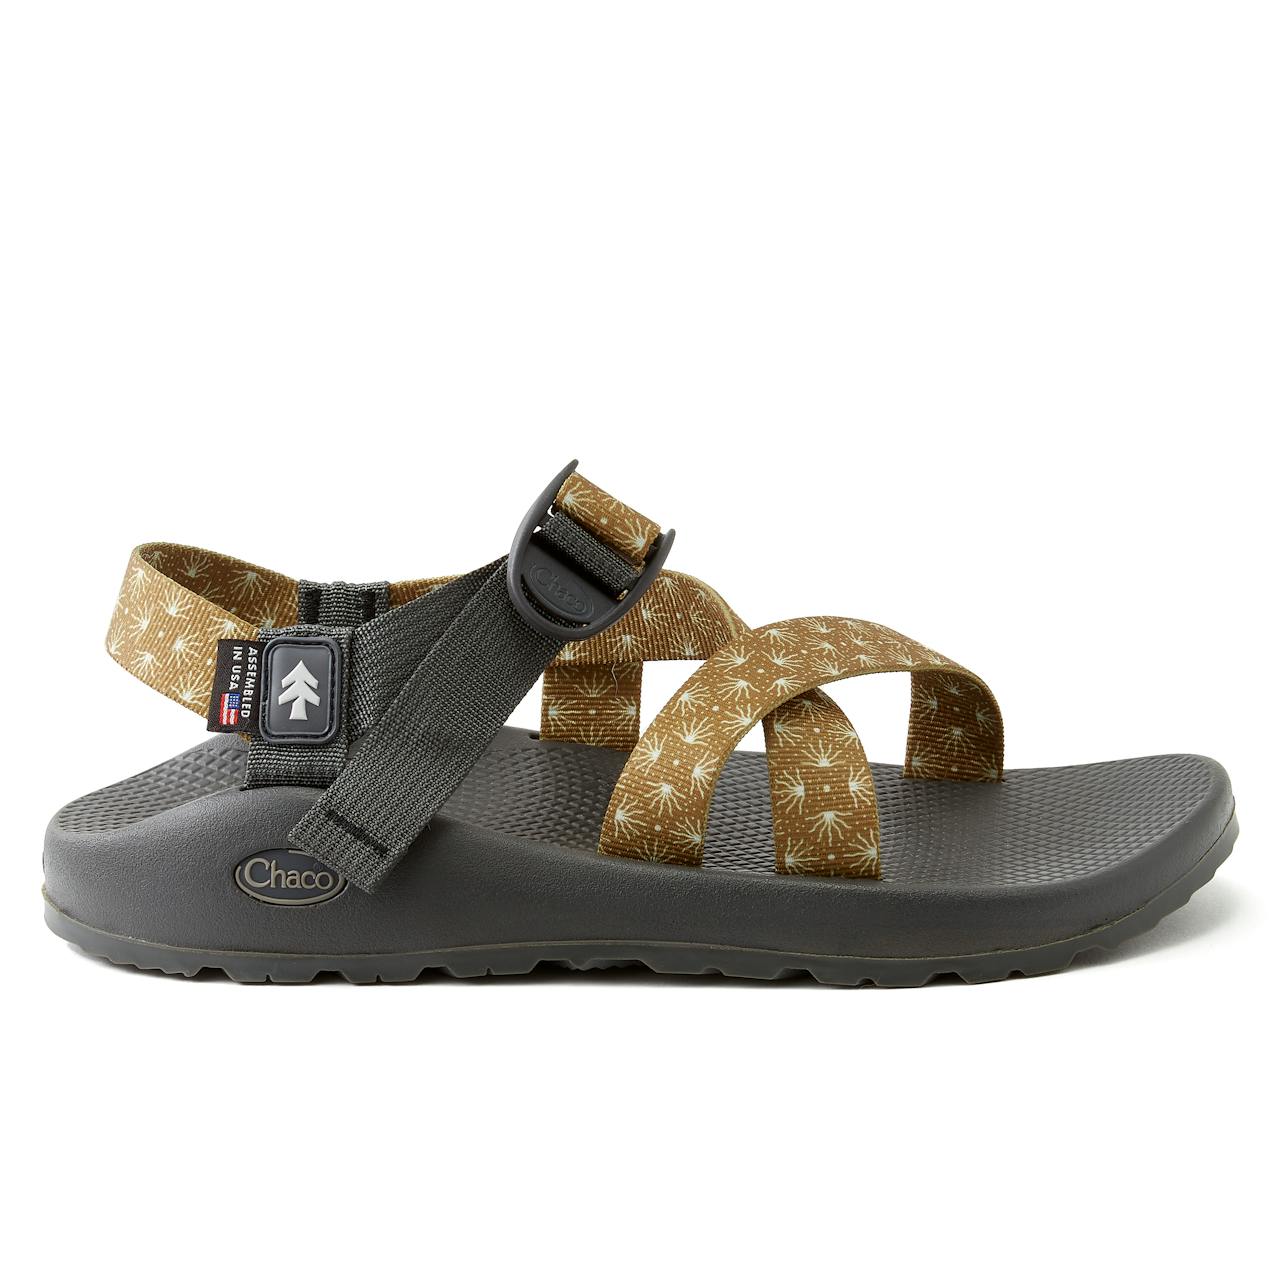 Chaco Huckberry x Chaco Z/1 "Agave"